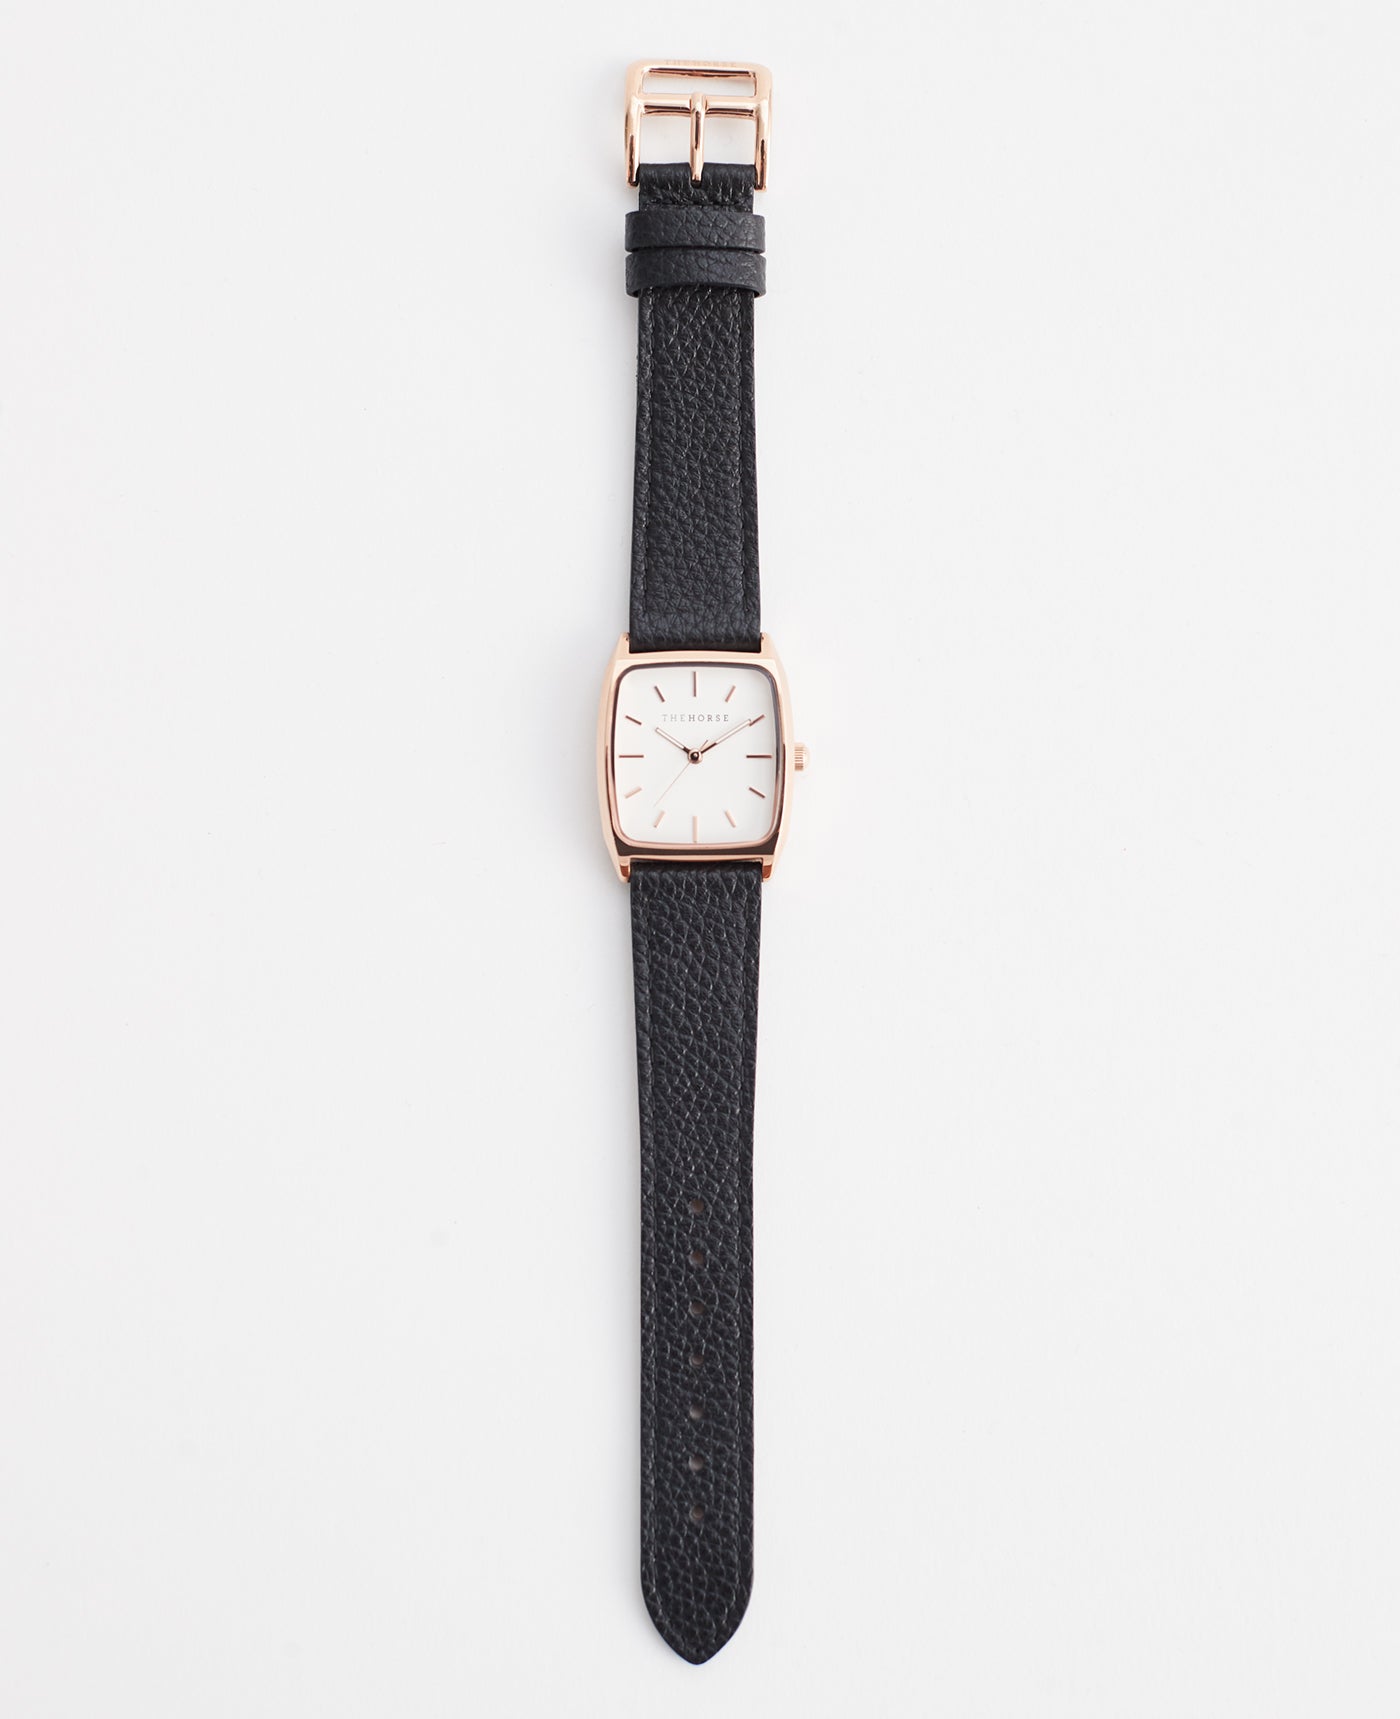 The Dress Watch: Rose Gold Case / White Dial / Black Leather Strap by The Horse®